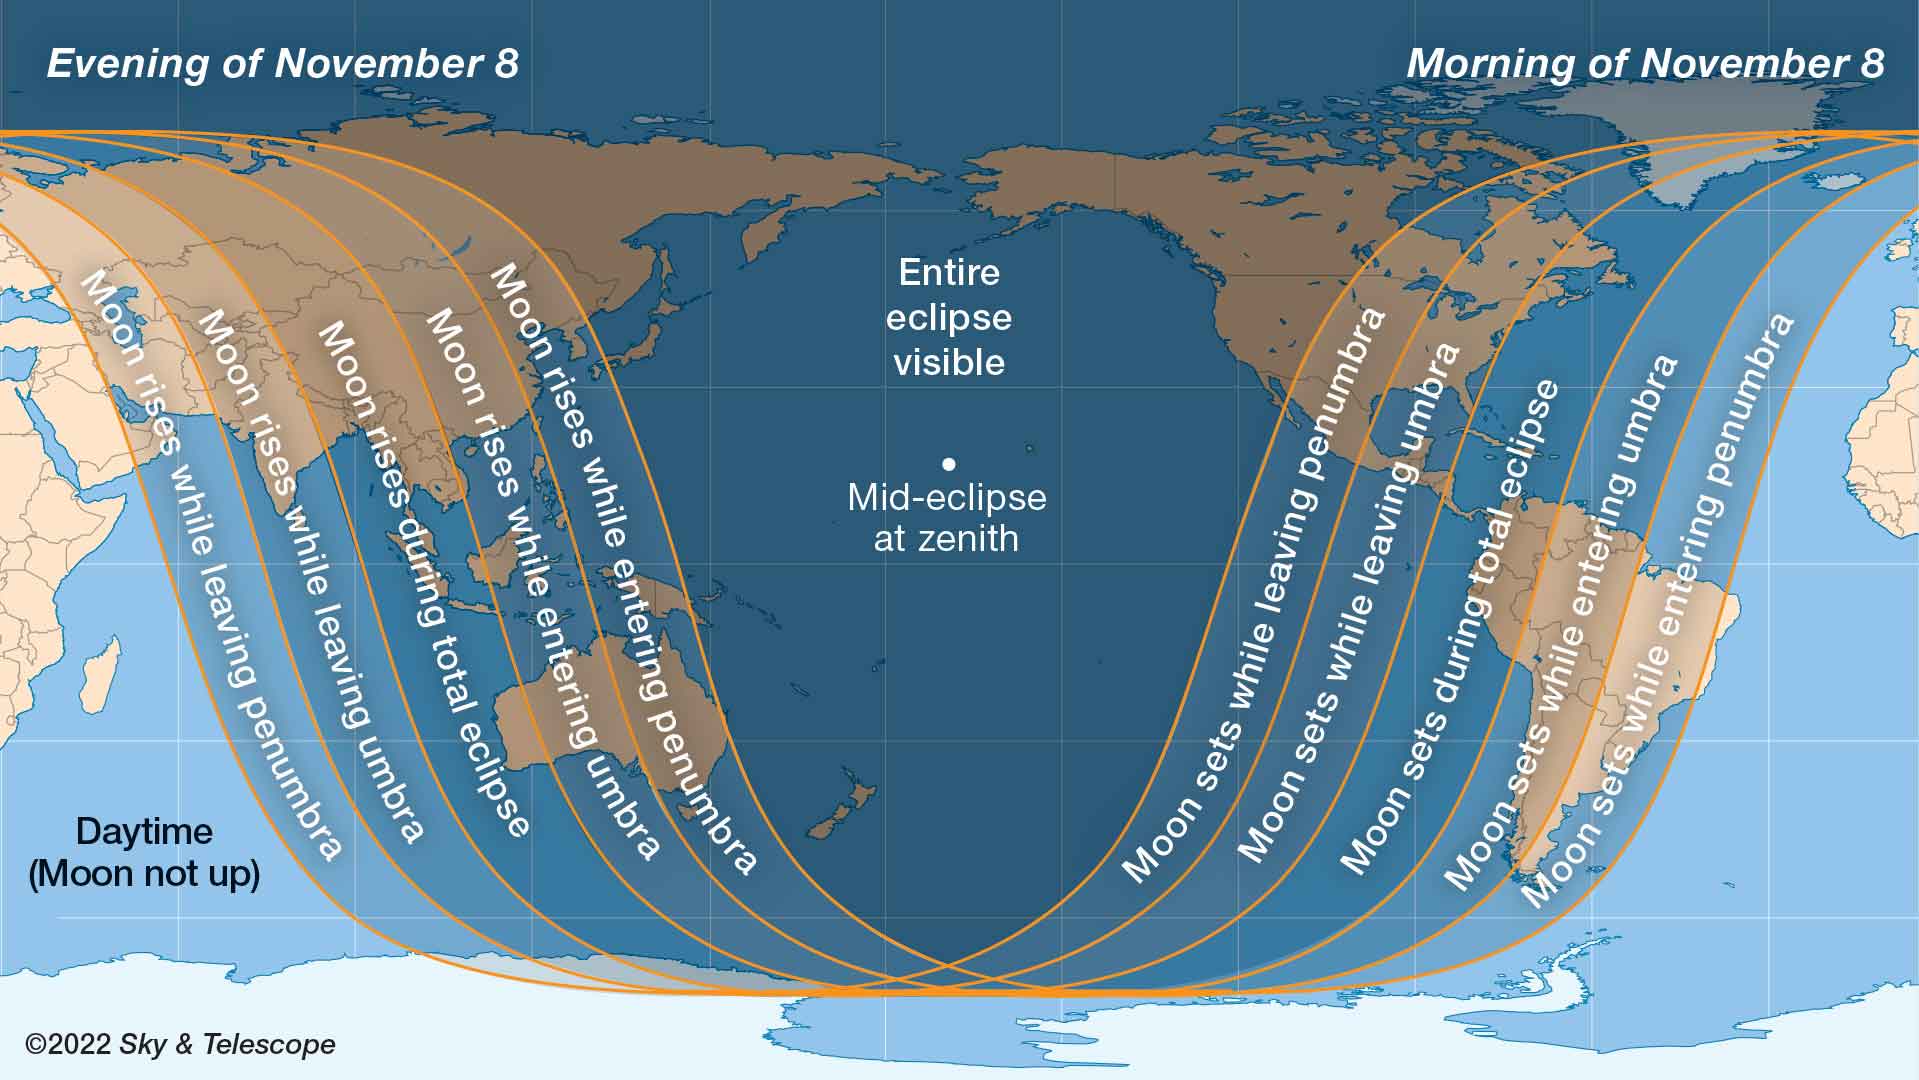 The map shows locations worldwide from which the November 8th lunar eclipse is visible, weather permitting.